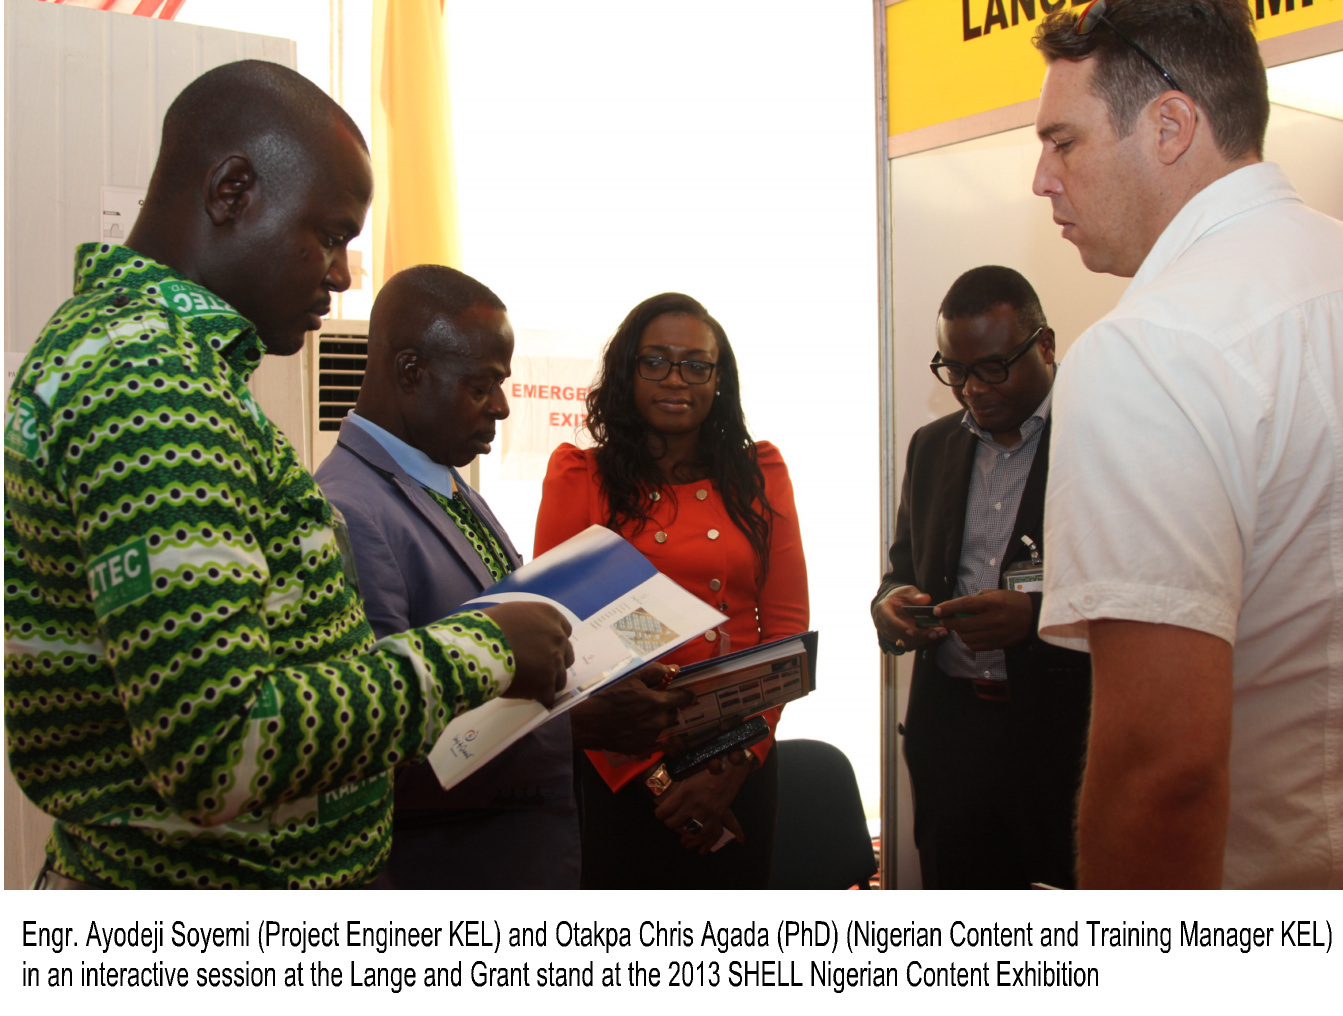 An Interactive session at the 2013 SHELL Nigerian Content Exhibition